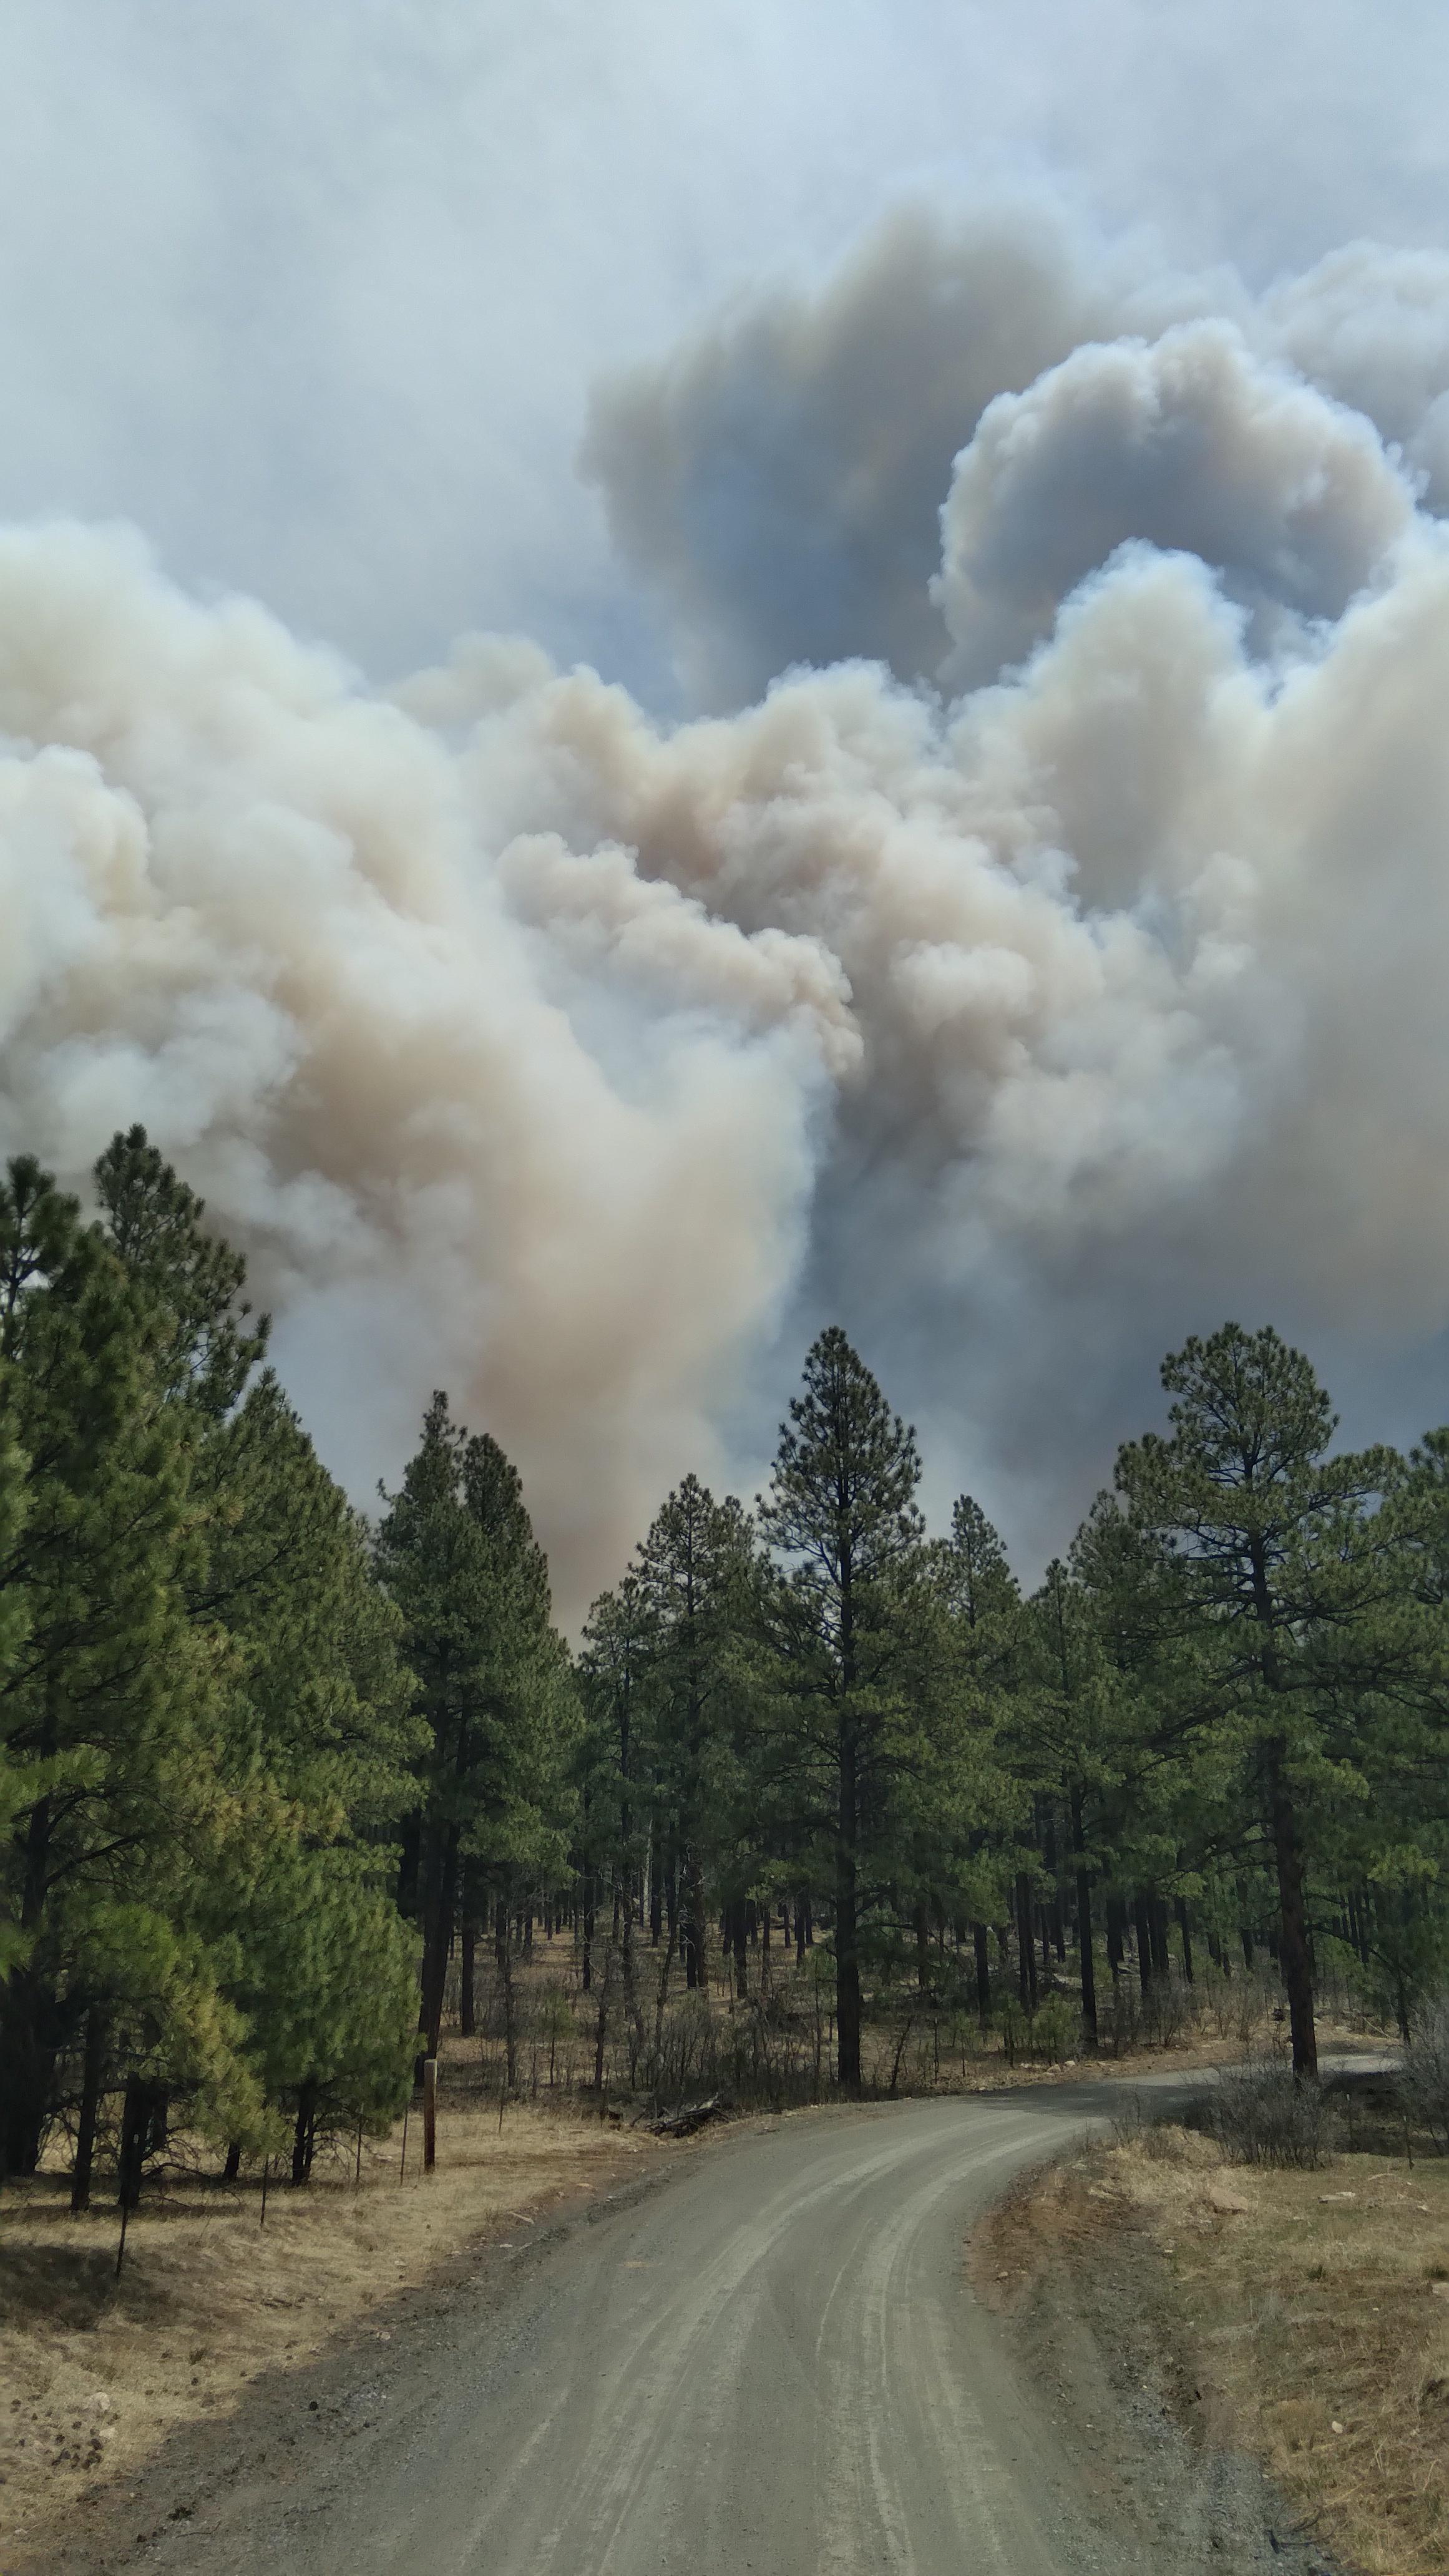 Fire activity in the Falls Creek area of San Miguel County, New Mexico on May 8.